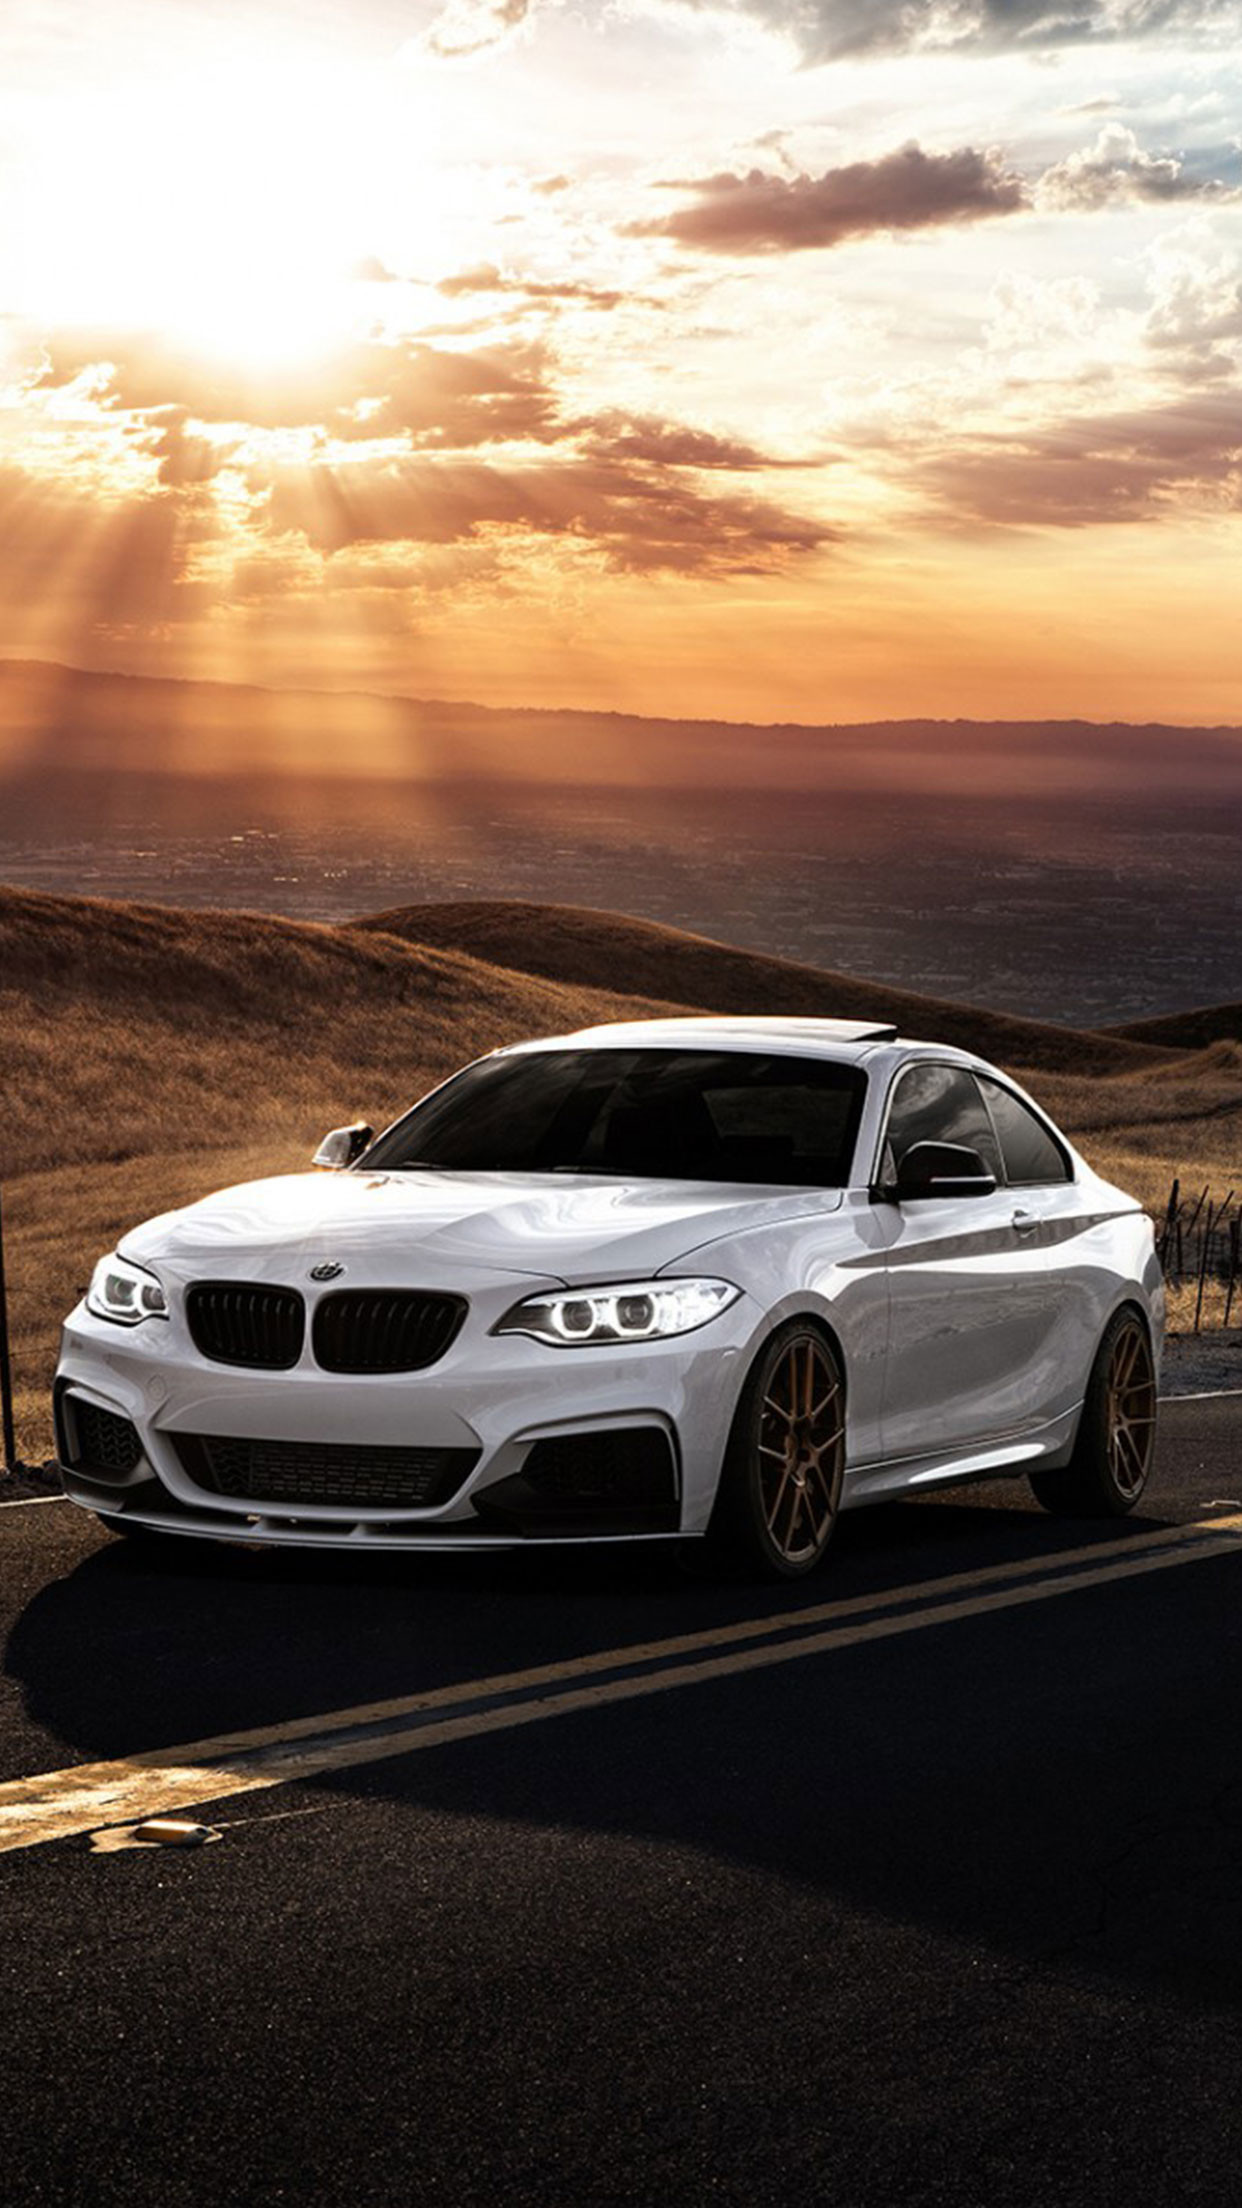 1242x2208 White Car BMW wallpaper for #Iphone and #Android #BMW #Car at wallzapp